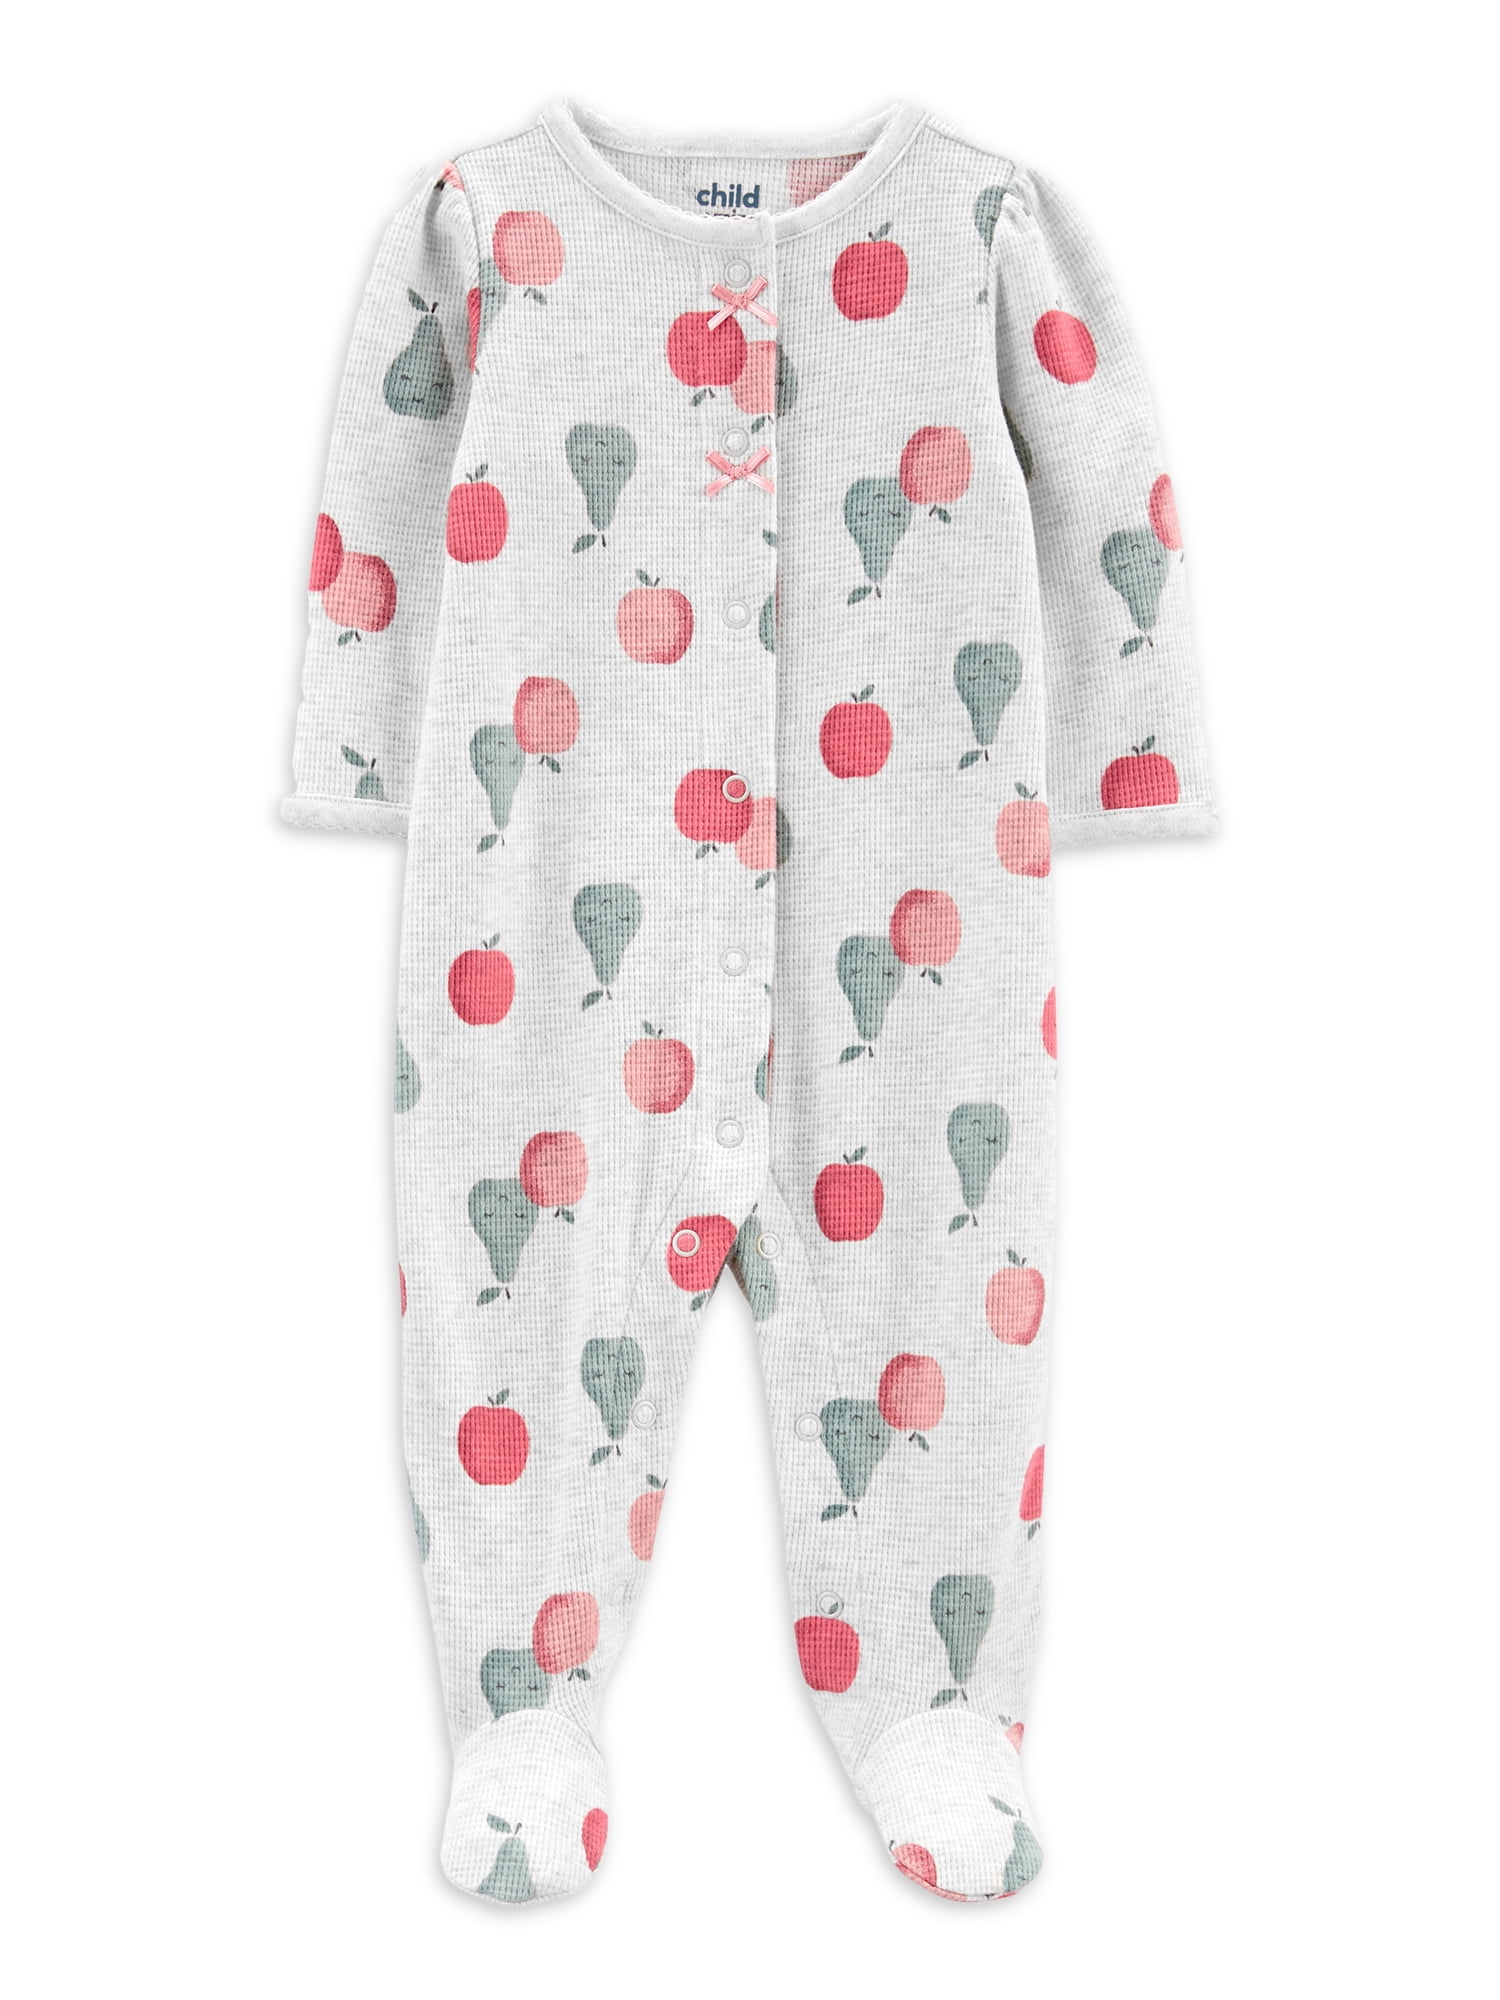 Details about   NWT Child of mine Preemie girl White with multi-colored Bunnies Sleep N Play 